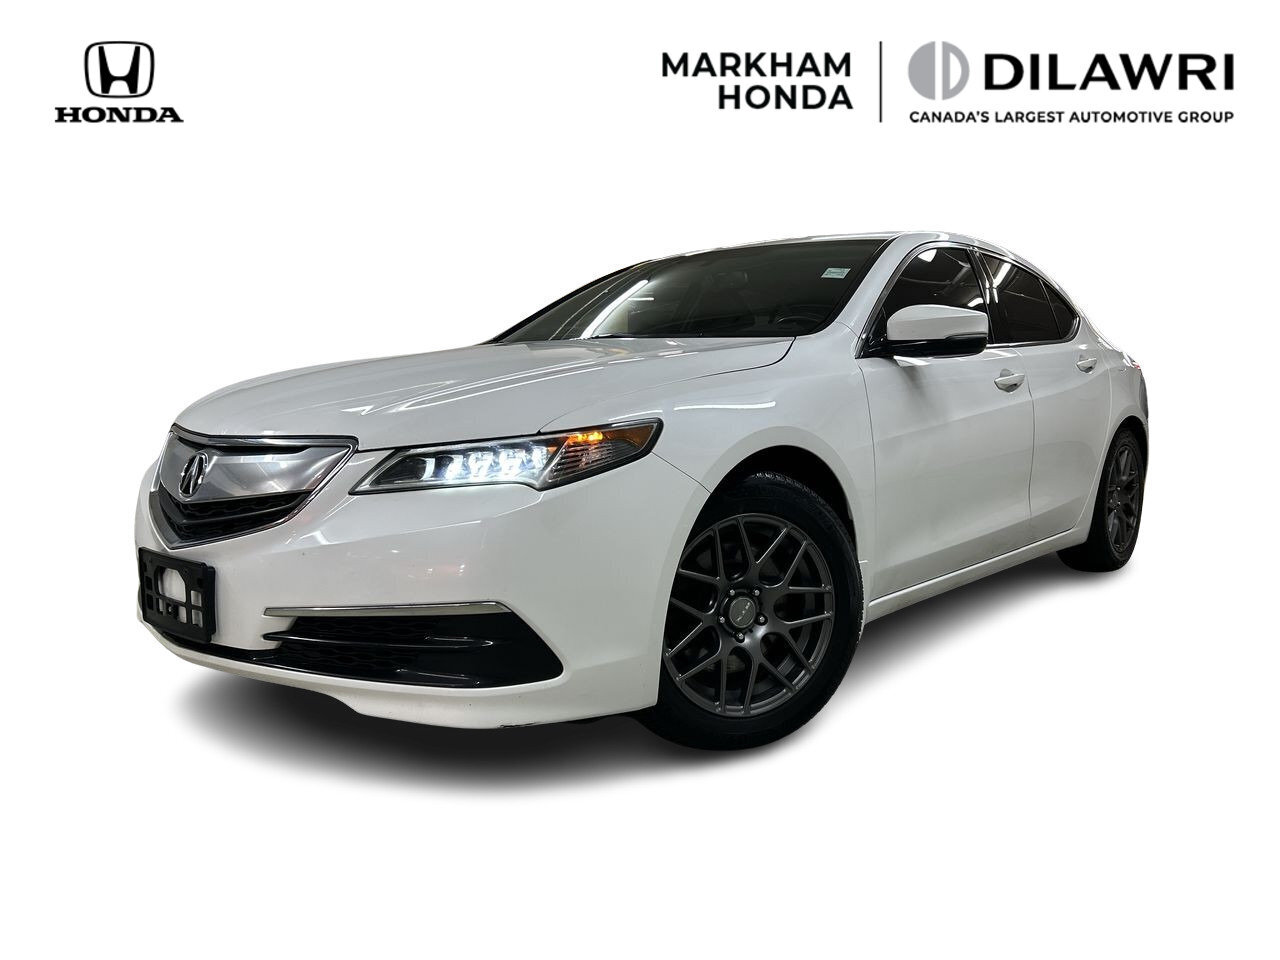 2015 Acura TLX 2.4L P-AWS 2 Sets Rims/Tires | Accident Free | Lea